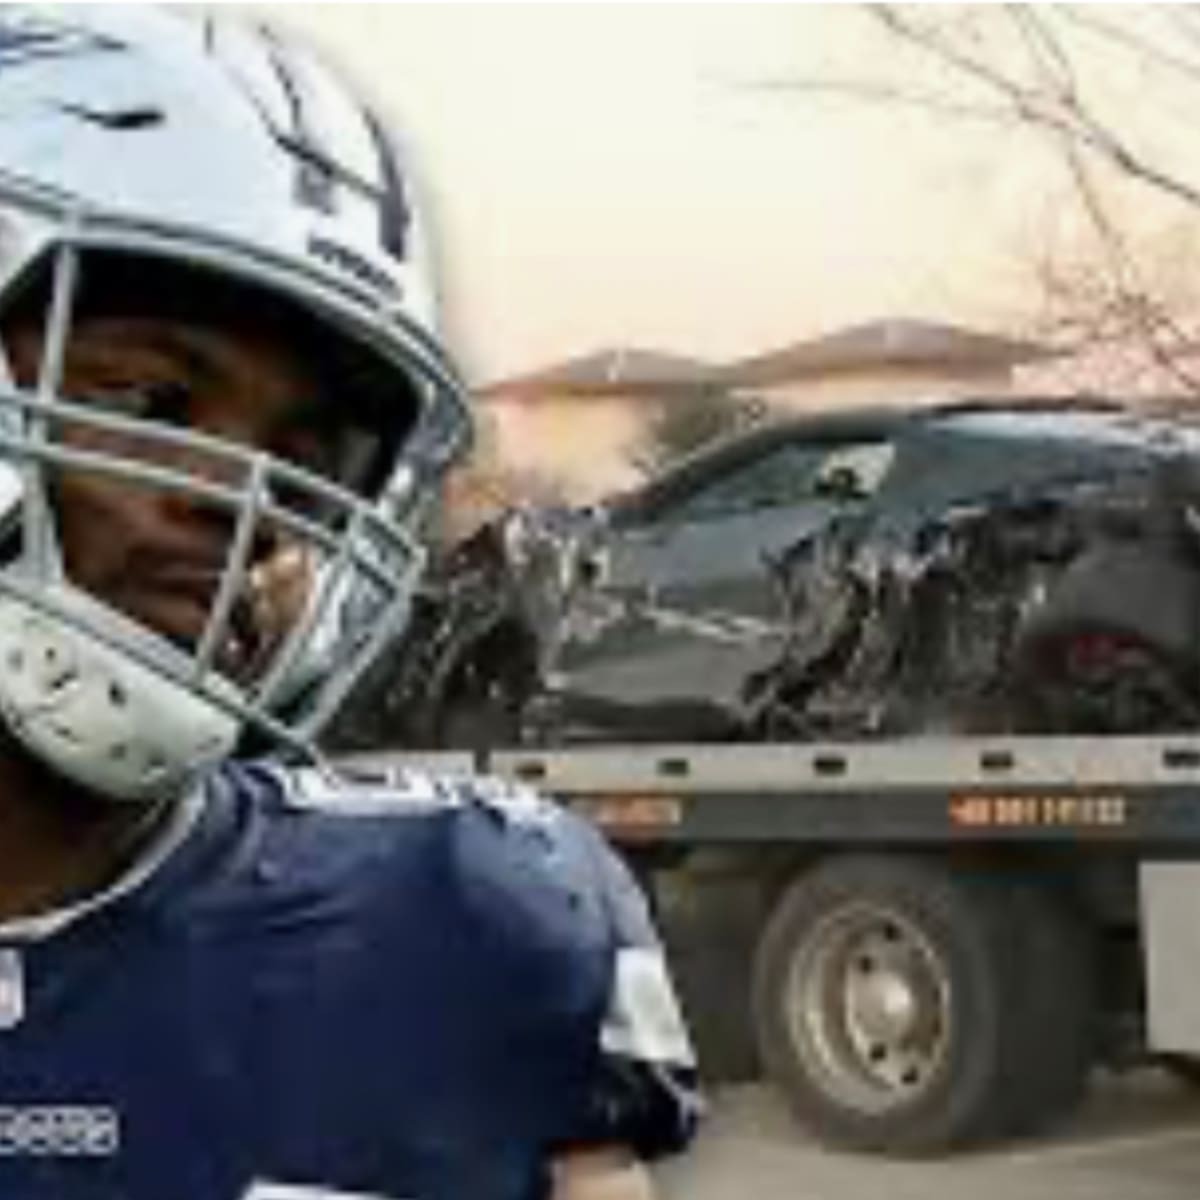 Dallas Cowboys Williams Thankful To Be Alive After Wreck